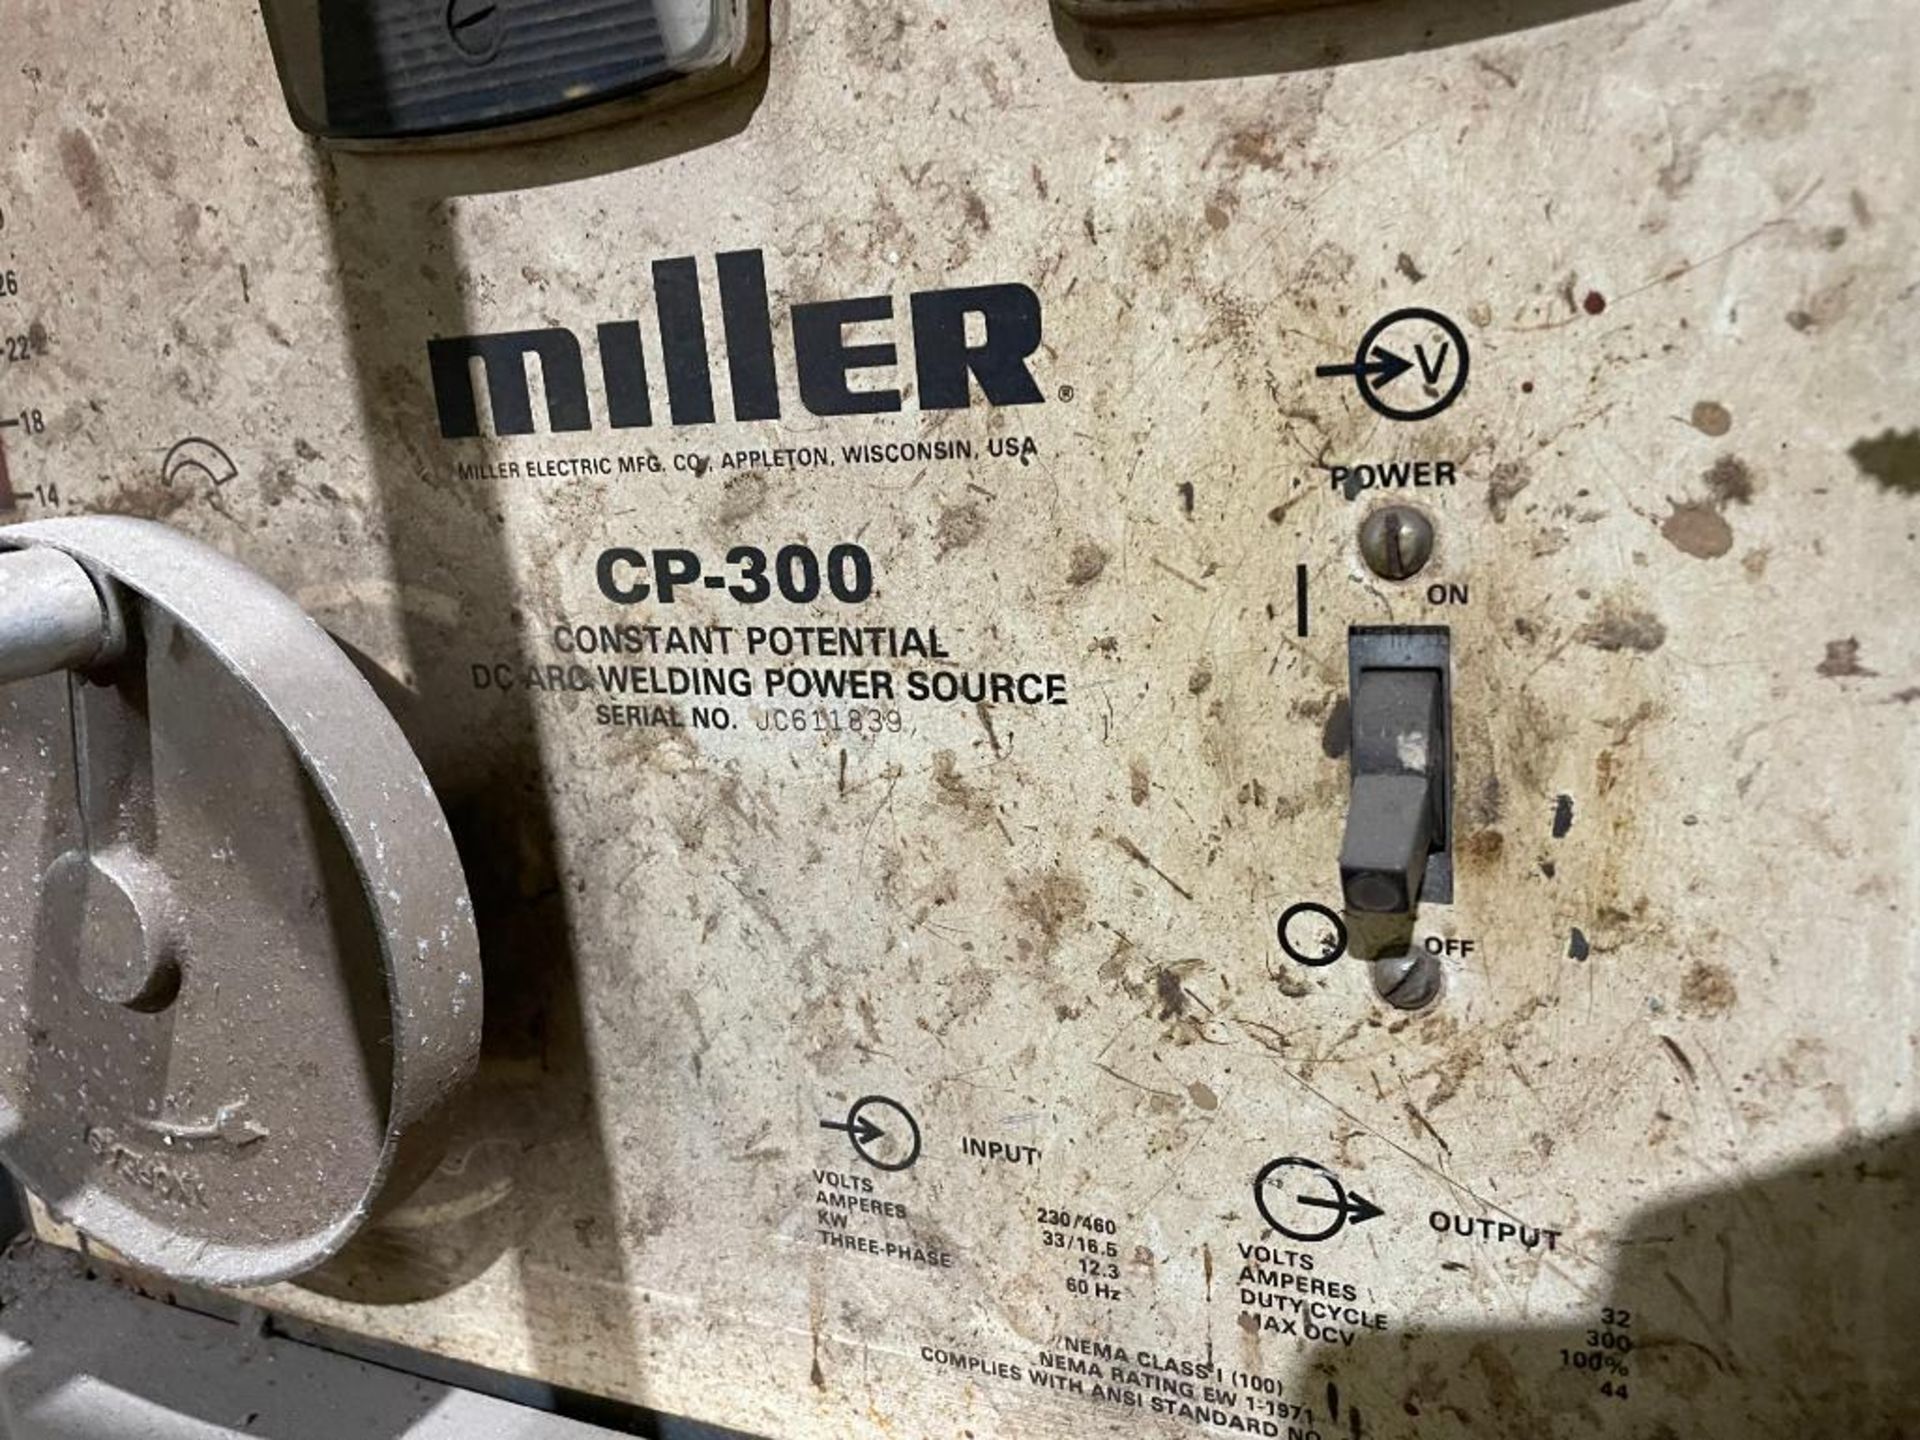 DESCRIPTION MILLER CP-300 DC ARC WELDING POWER SOURCE WELDER (NOT IN WORKING CONDITION, FOR PARTS) B - Image 4 of 8